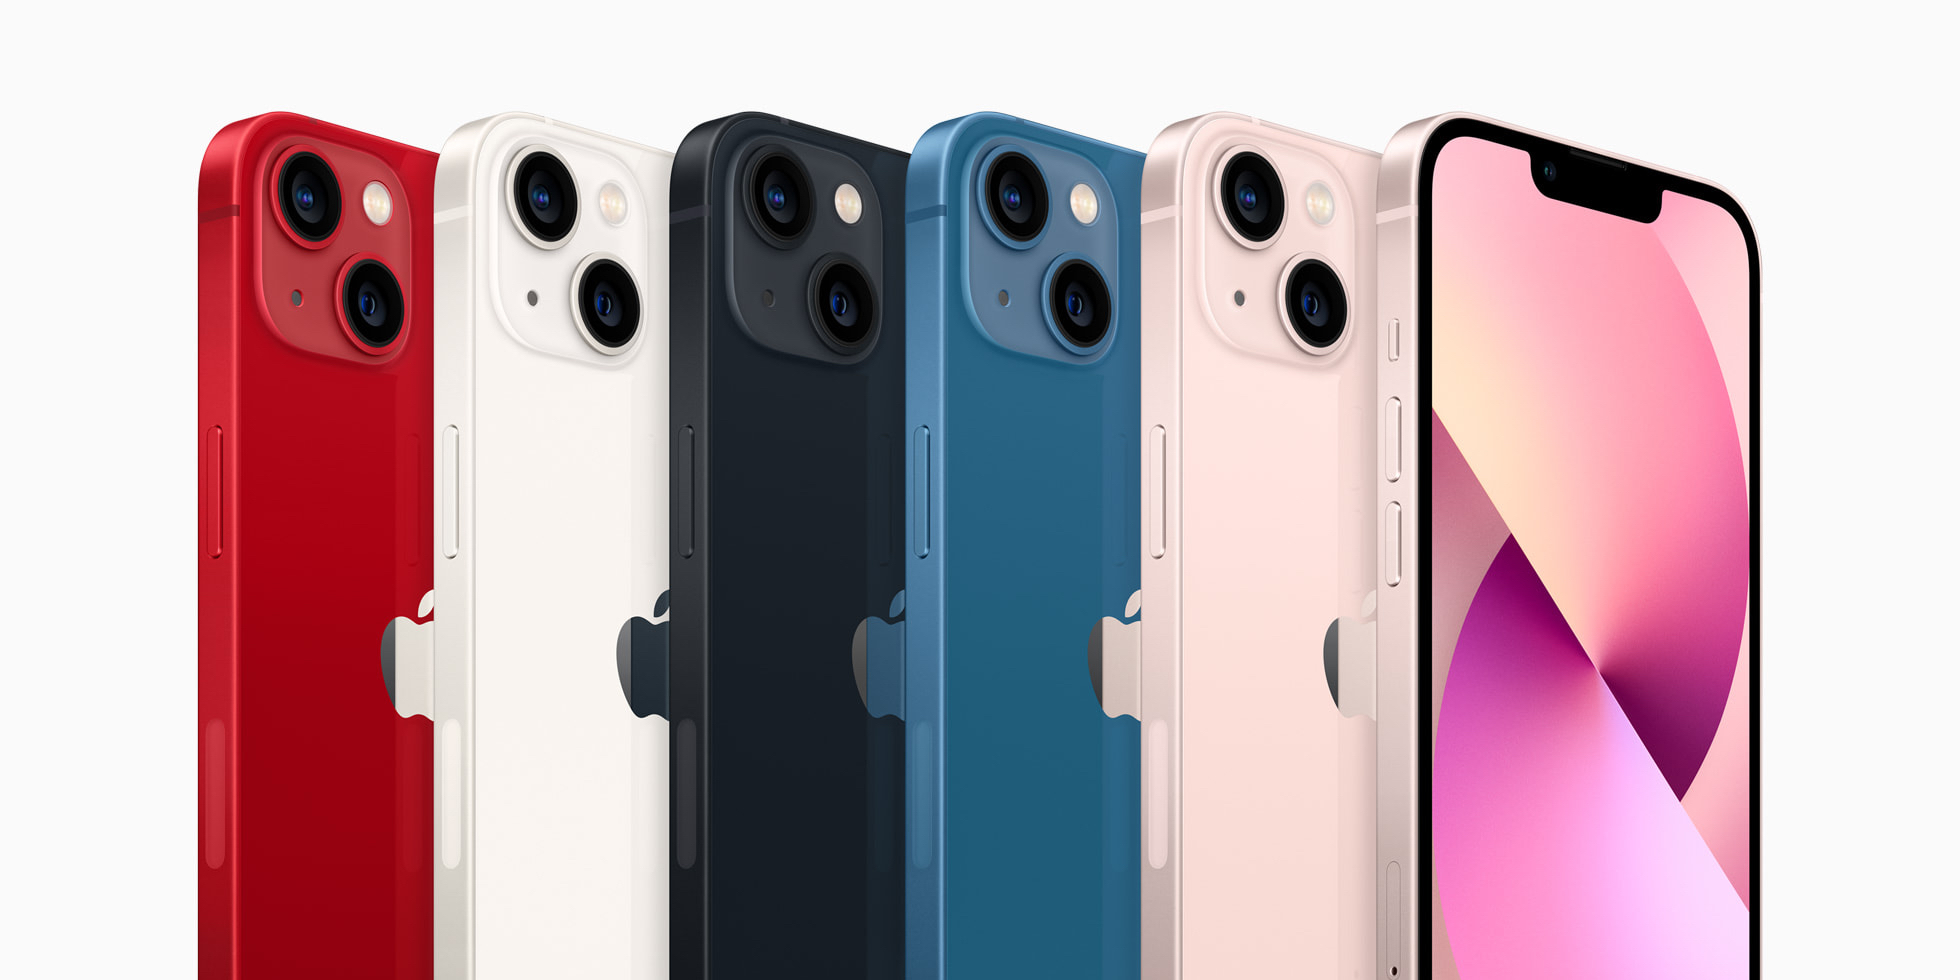 Iphone 13 Pro Quelle Couleur Choisir Poll: What's your favorite iPhone 13/iPhone 13 Pro color? - 9to5Mac